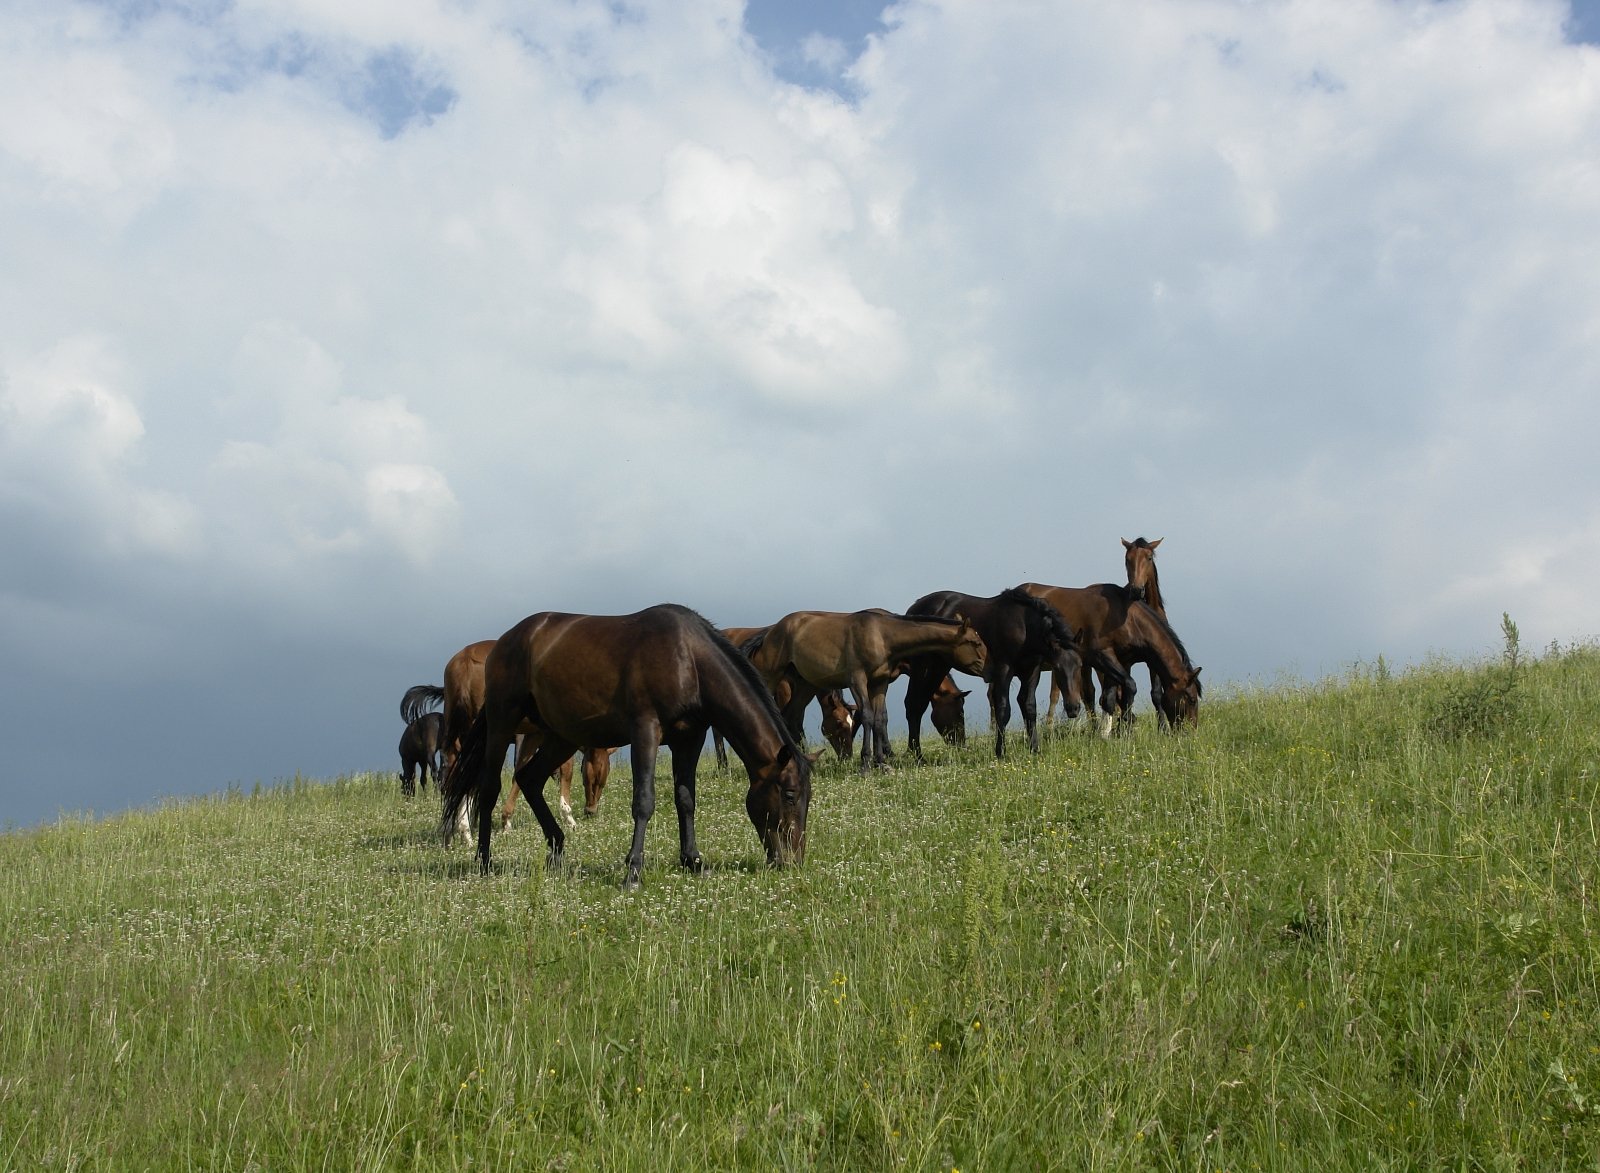 several horses that are grazing in the grass